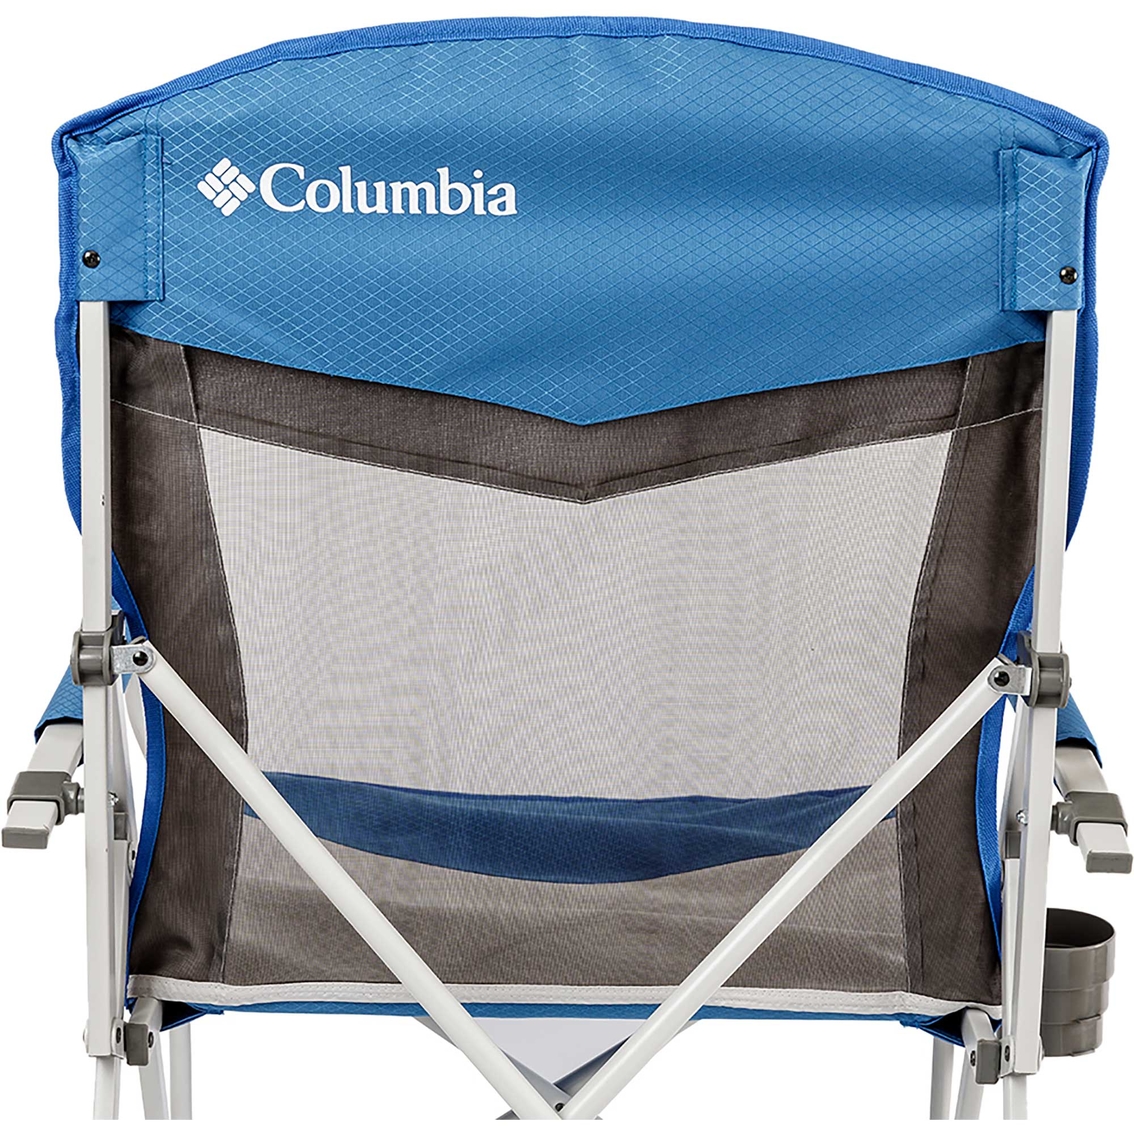 Columbia Hard Arm Chair with Mesh - Image 4 of 6